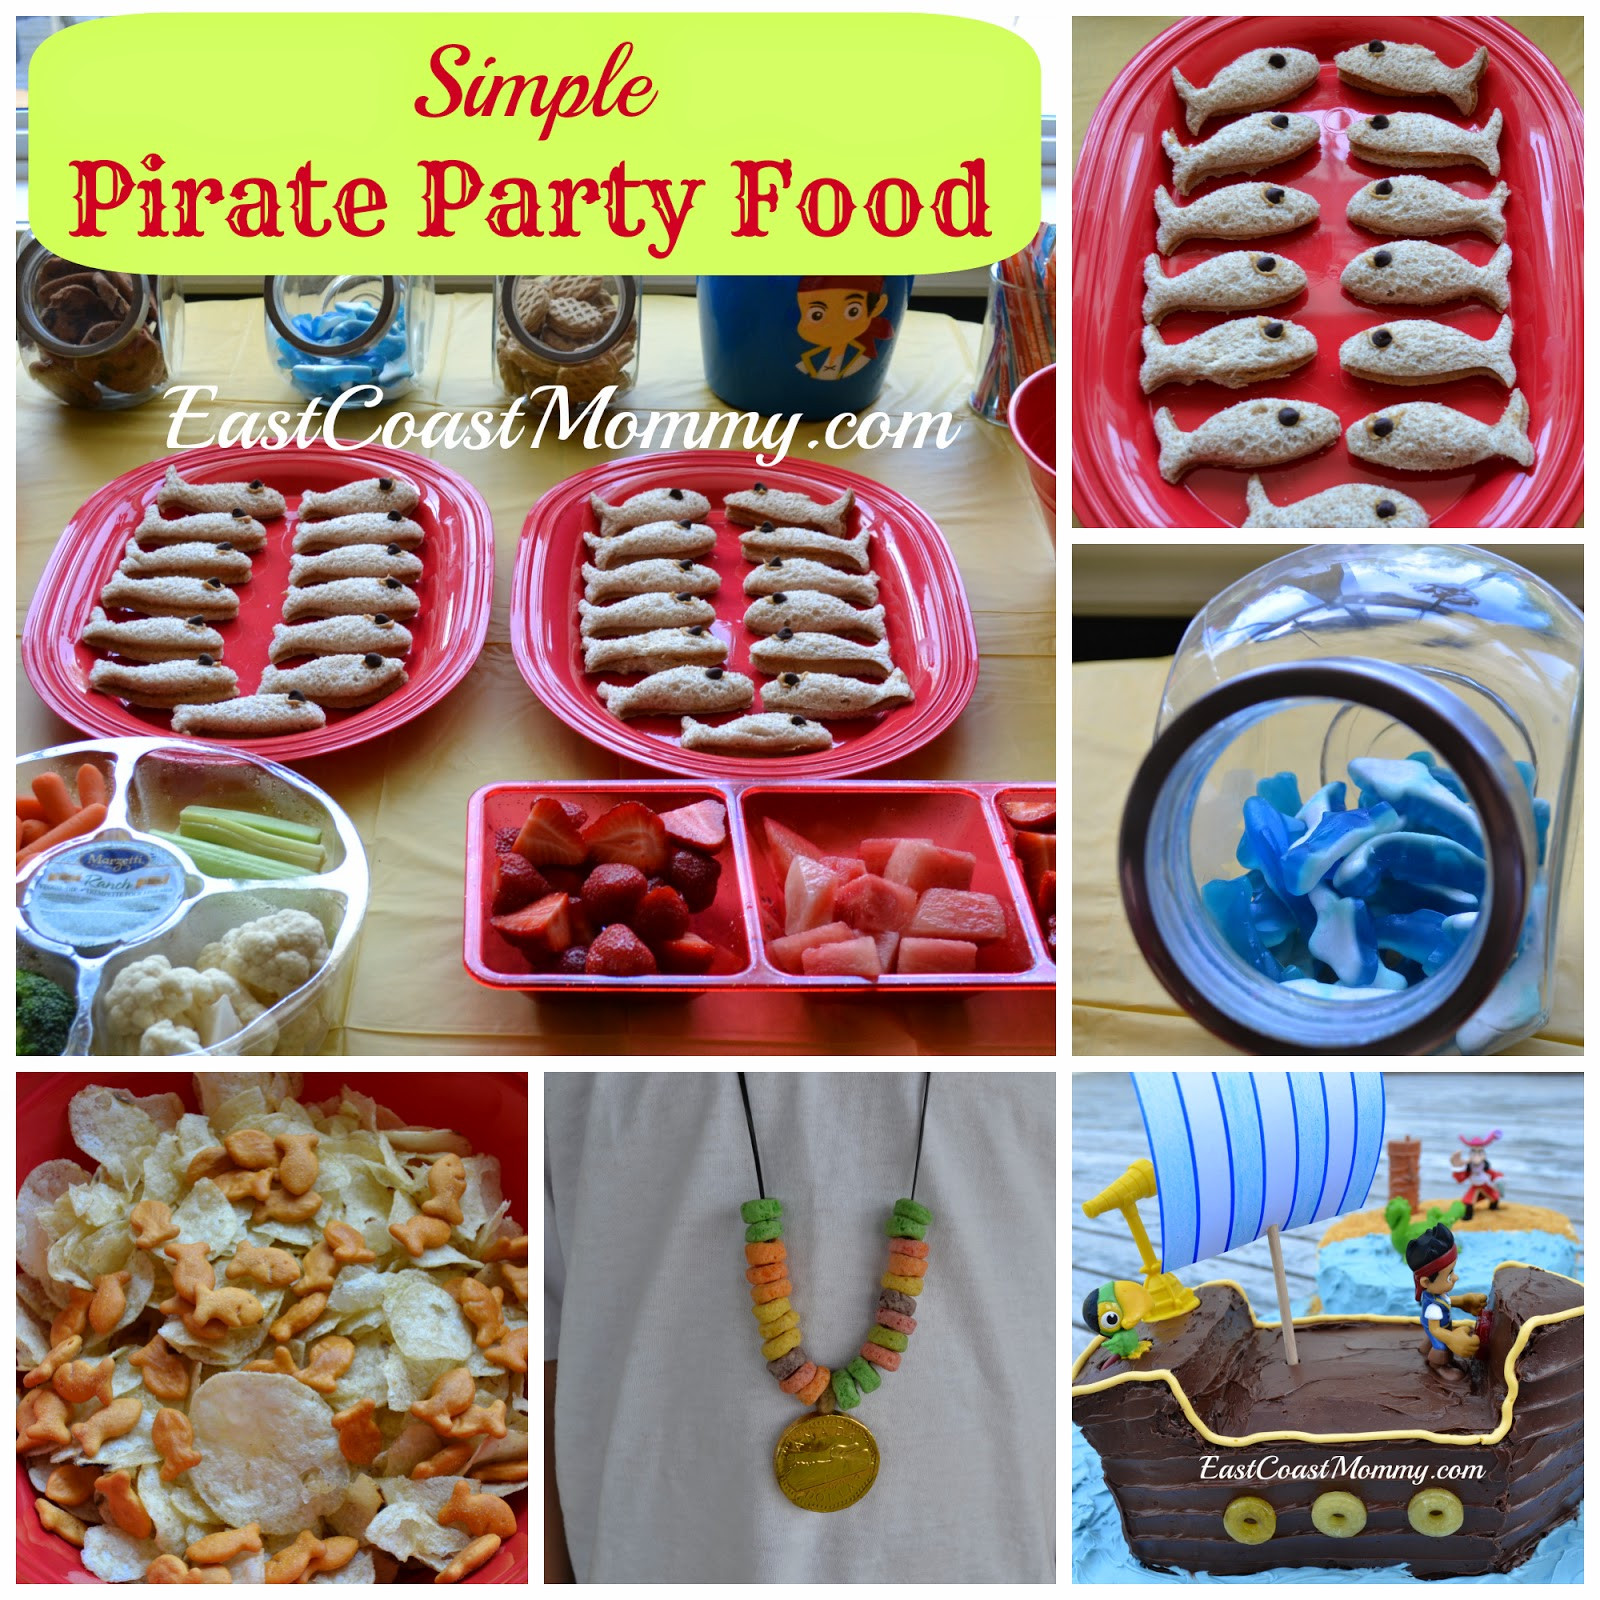 Jake And The Neverland Pirates Party Food Ideas
 East Coast Mommy Jake and the Neverland Pirates Party Food